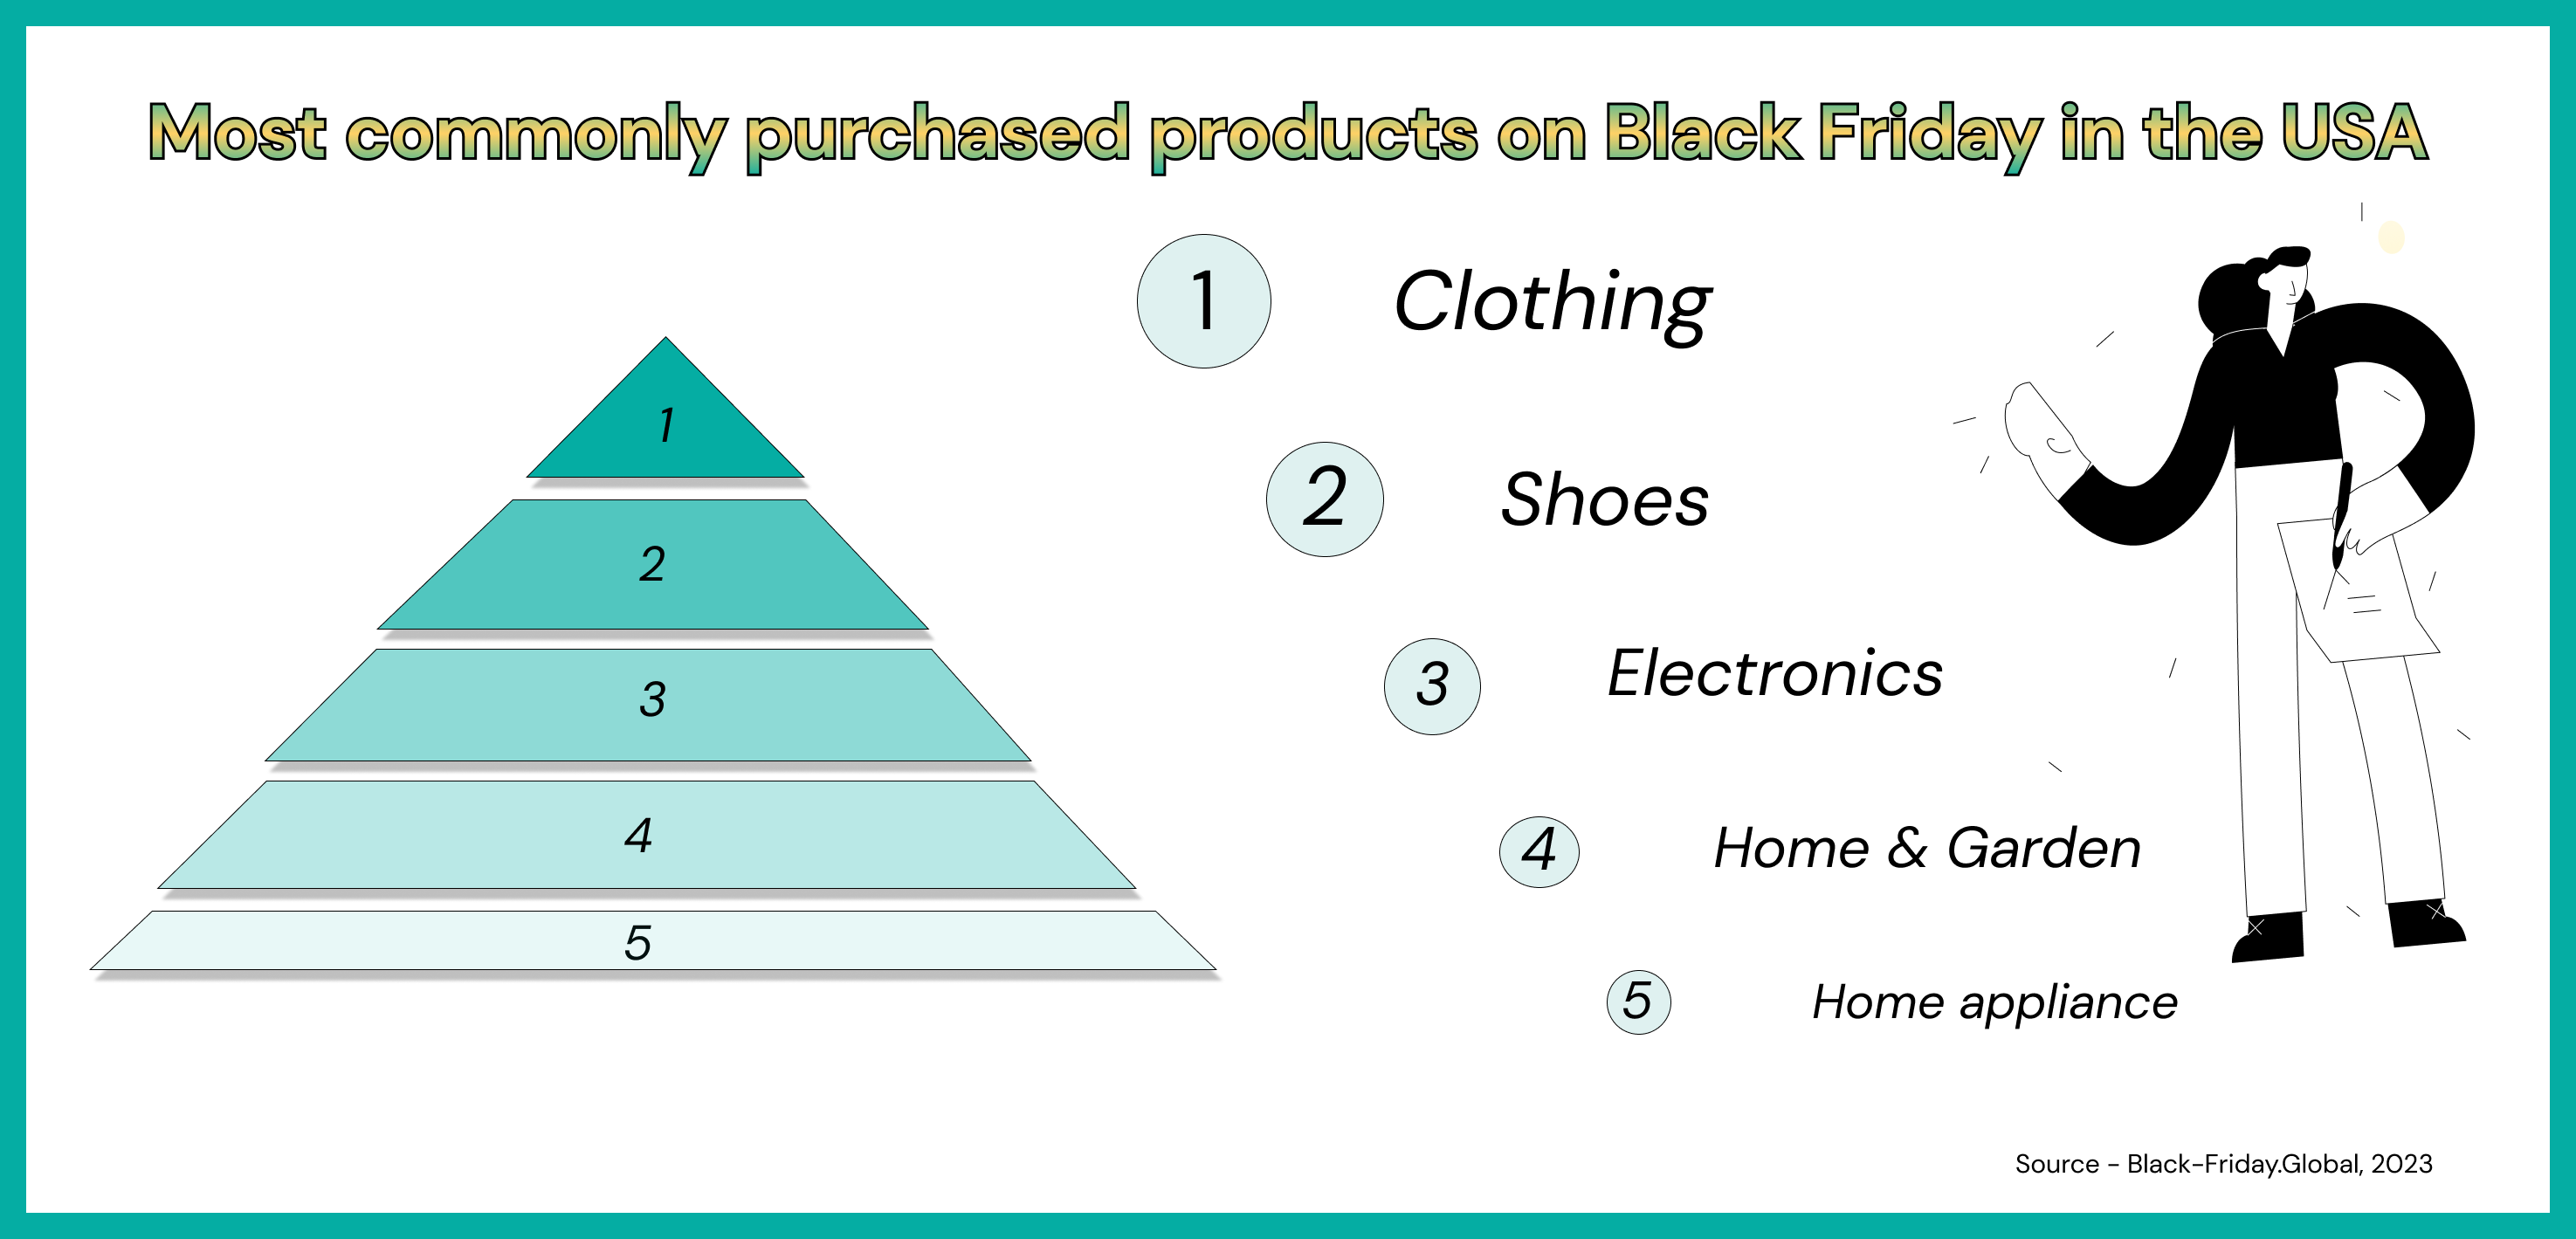 Most commonly purchased products on Black Friday in the USA